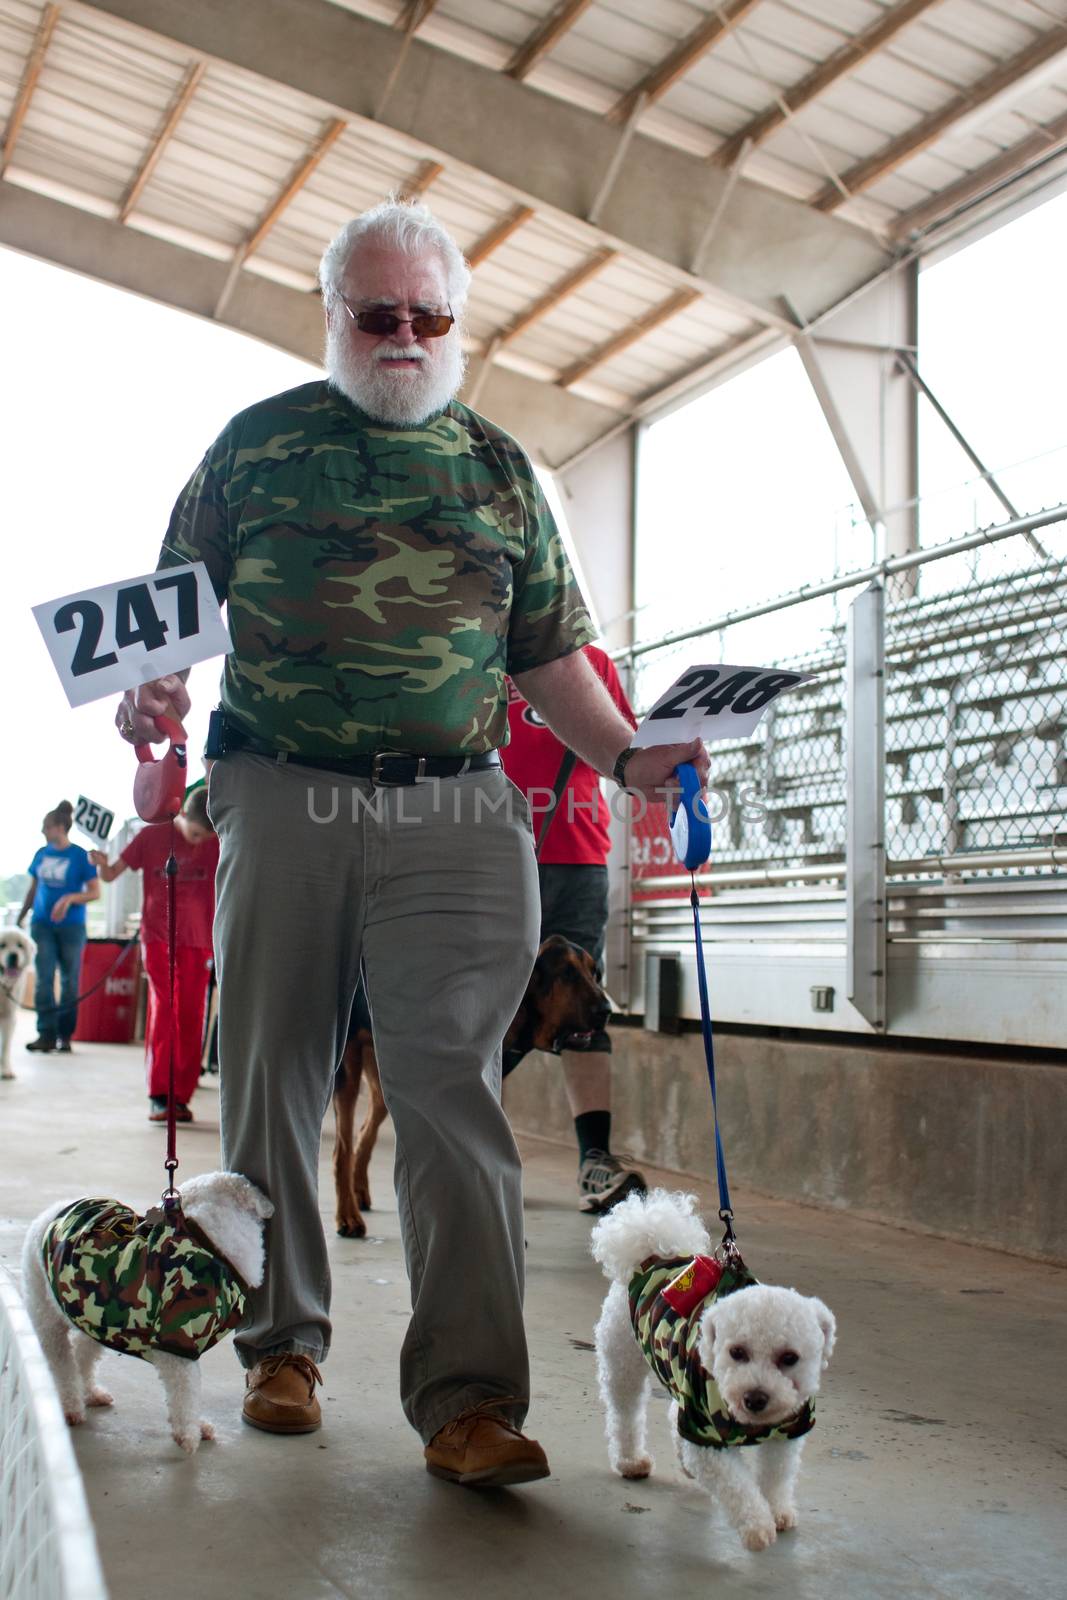 Dog Owner And Poodles Both Wear Camo Shirts At Festival by BluIz60